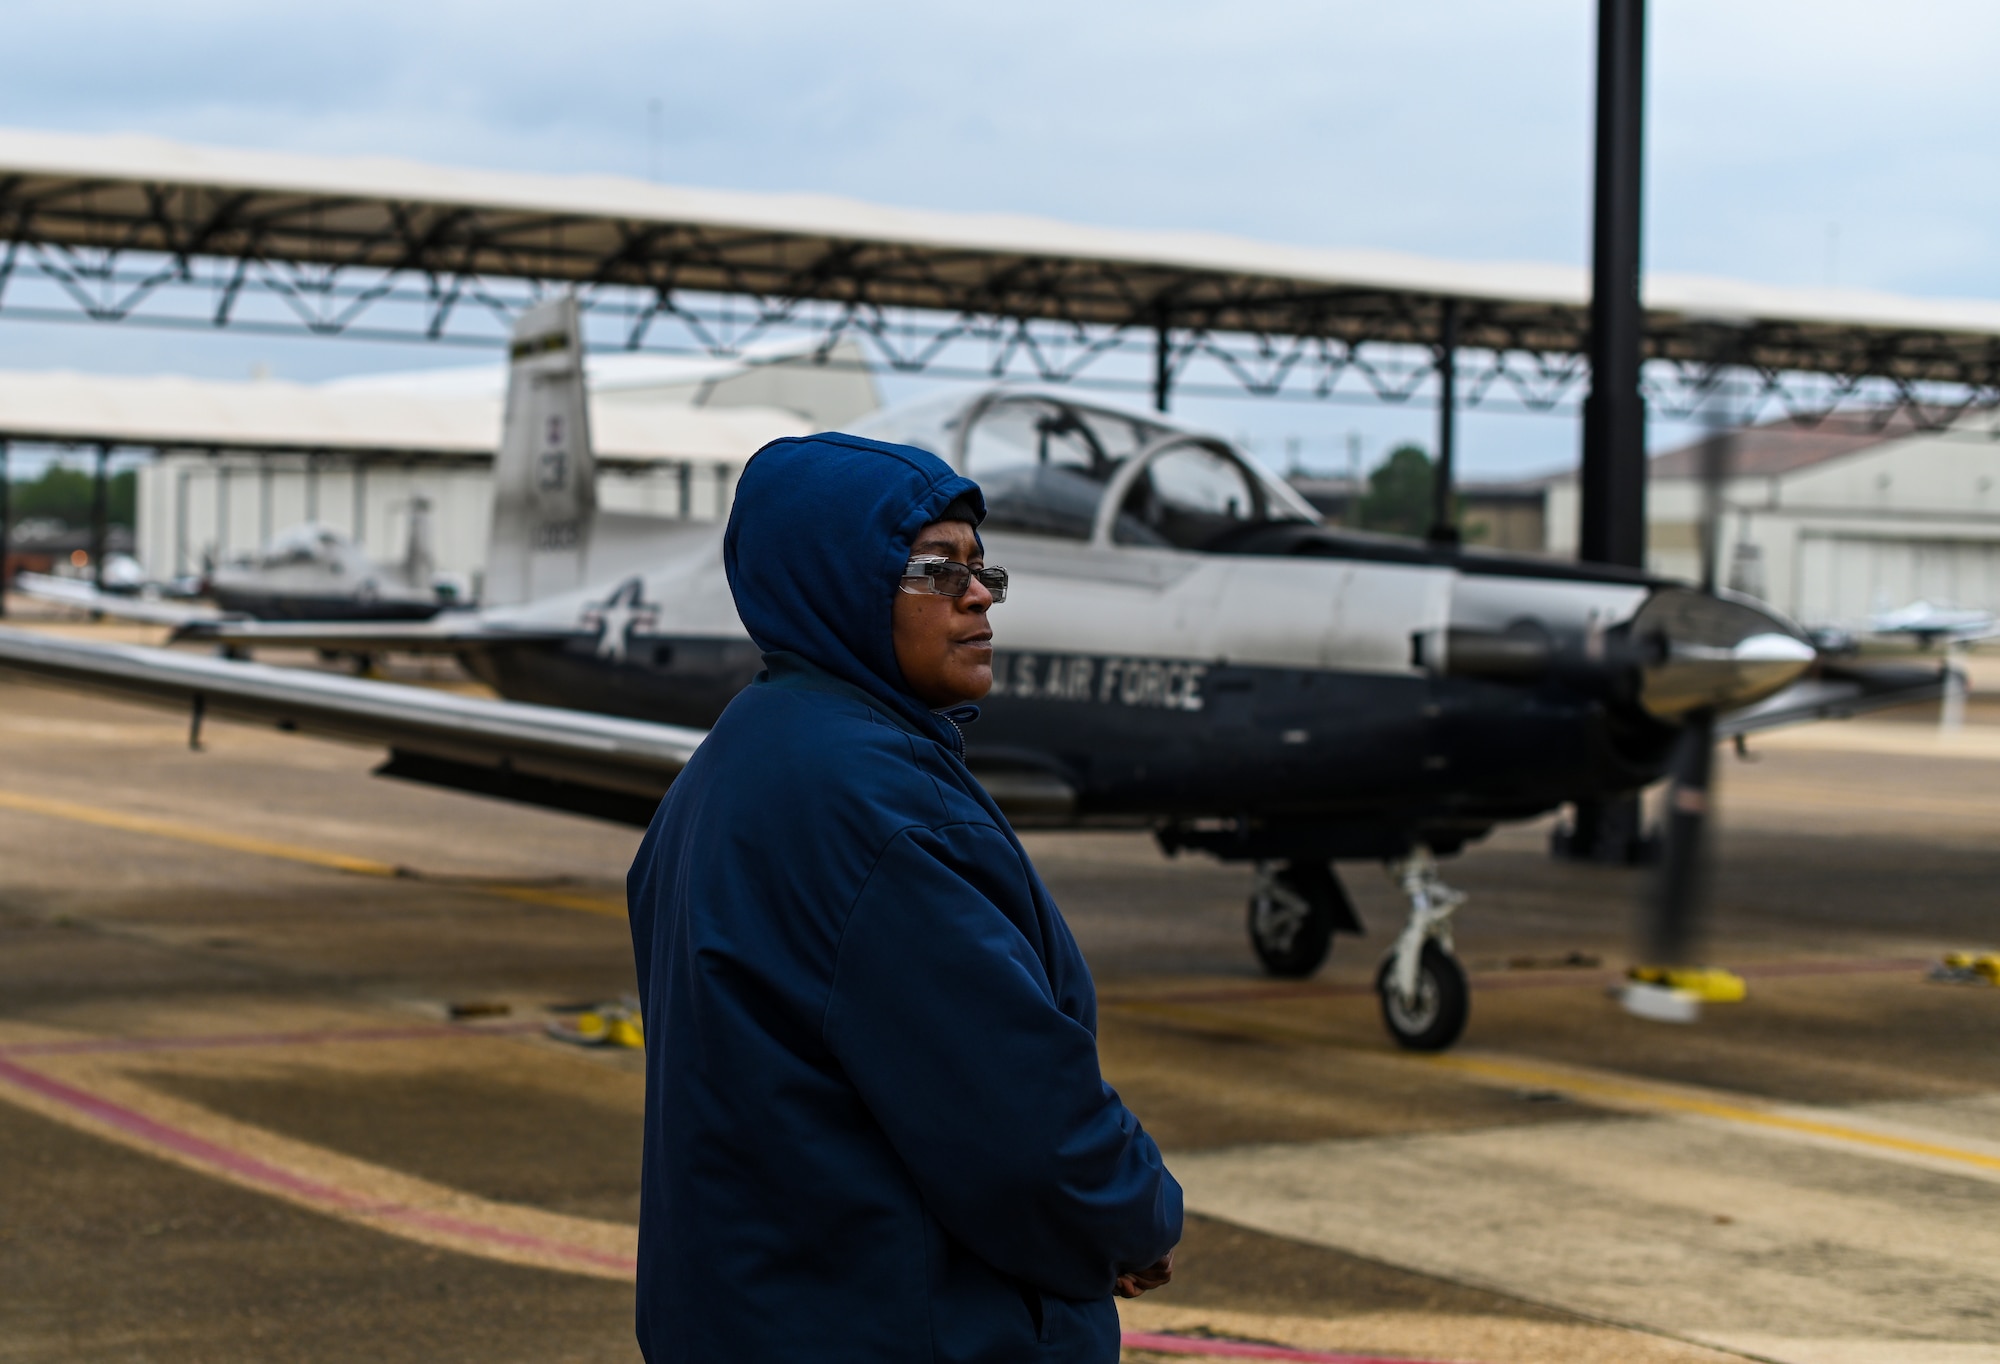 Charlotte Lindsey, M1 Support Services T-6A Texan II maintainer, prepares to guide a T-6 for taxiing on Oct. 30, 2020, at Columbus Air Force Base, Miss. The T-6 is a single-engine, two-seat primary trainer designed to train Joint Primary Pilot Training, or JPPT, students in basic flying skills common to U.S. Air Force and Navy pilots. (U.S. Air Force photo by Airman 1st Class Davis Donaldson)